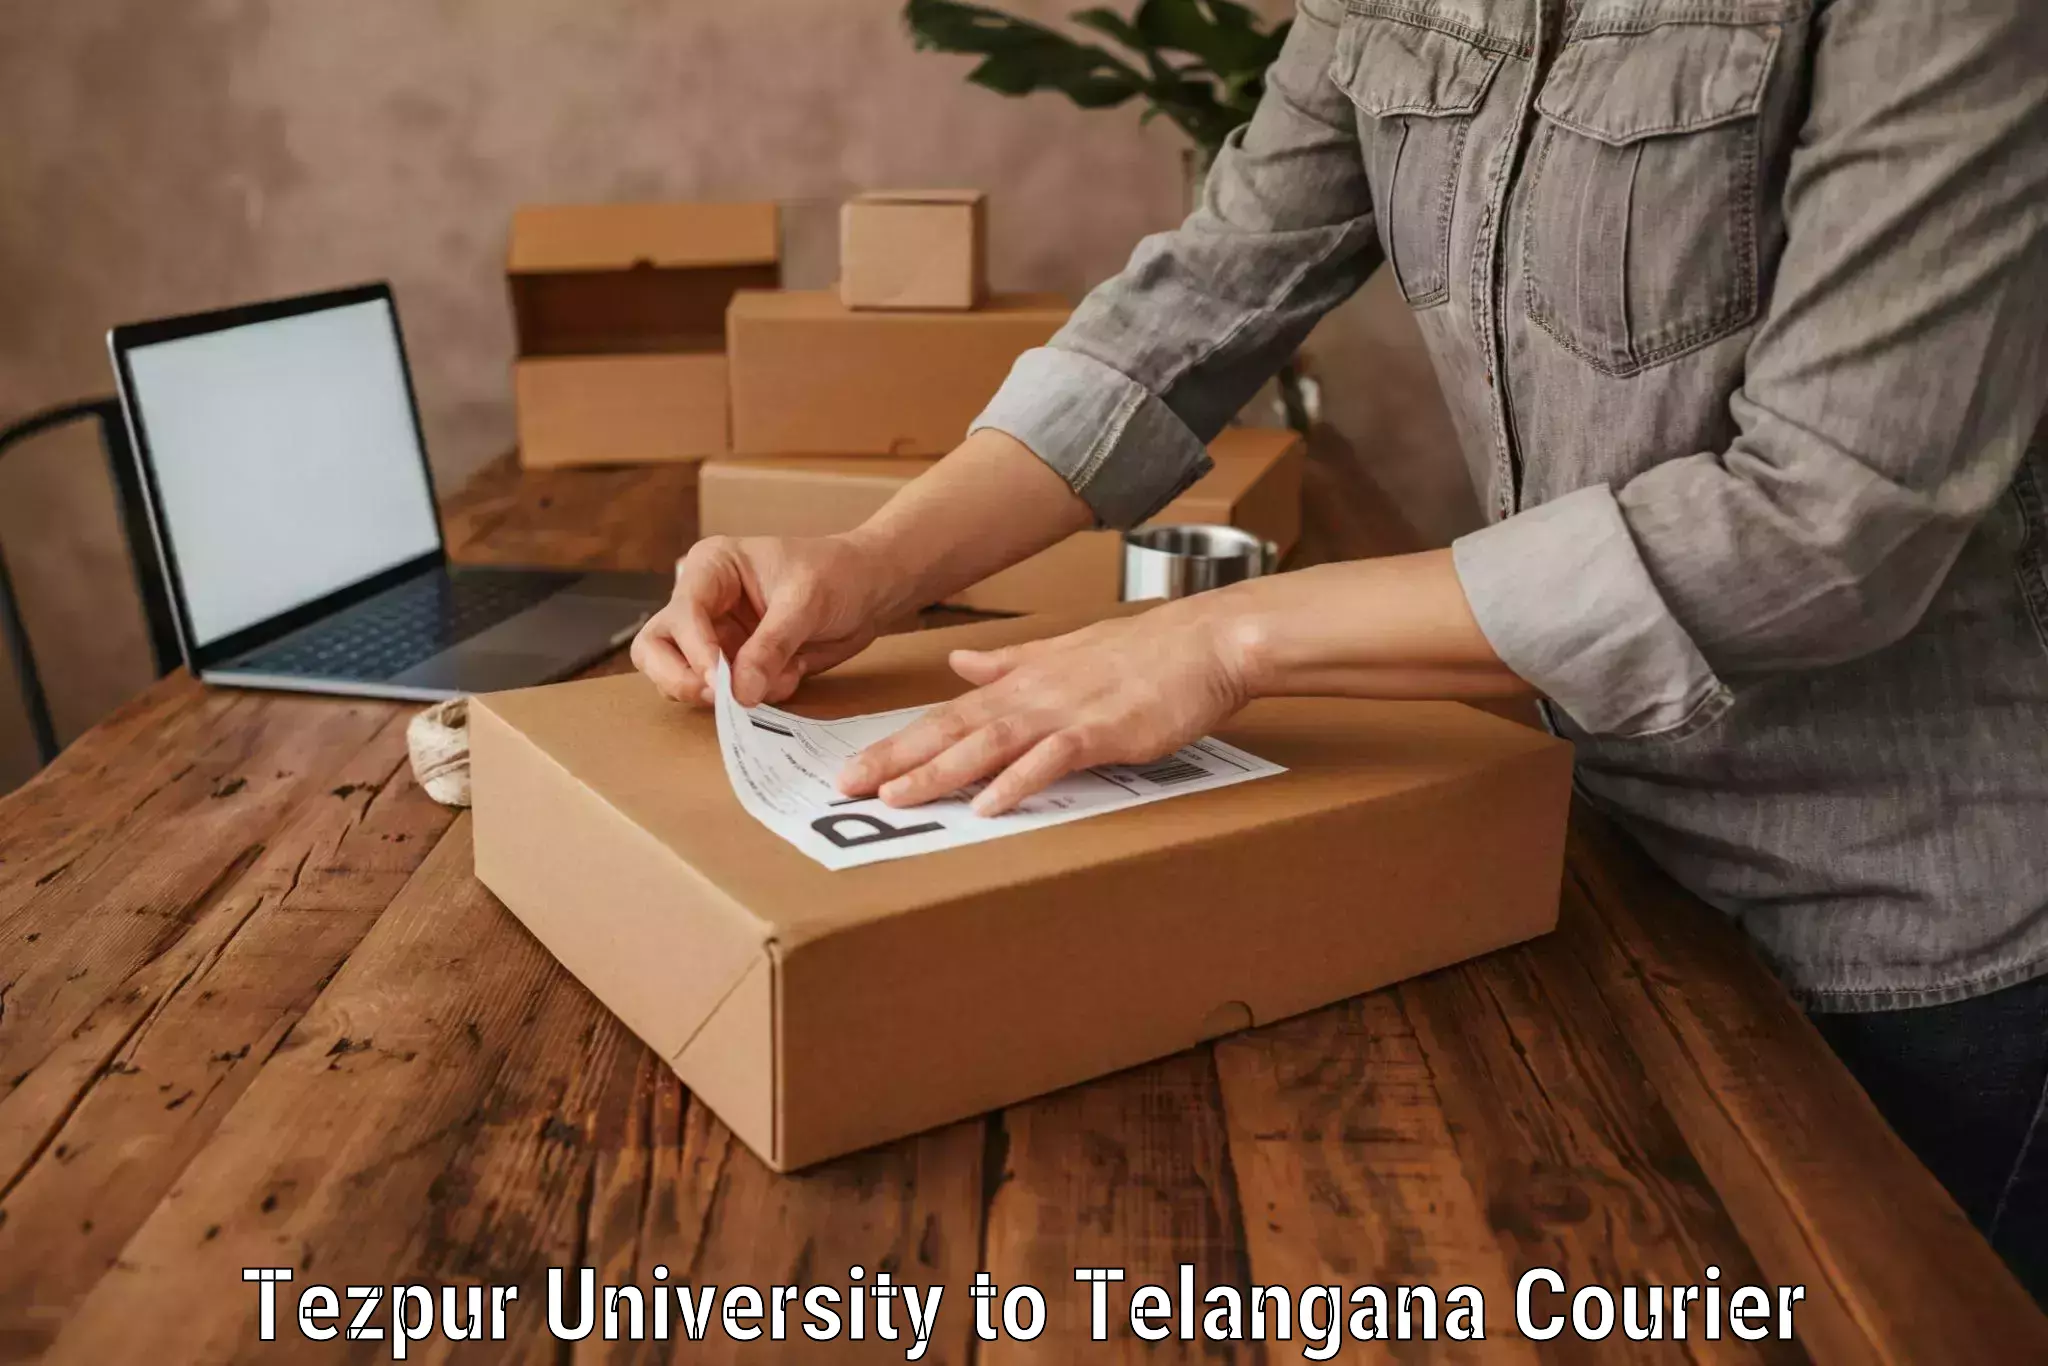 Reliable baggage delivery in Tezpur University to Eligedu